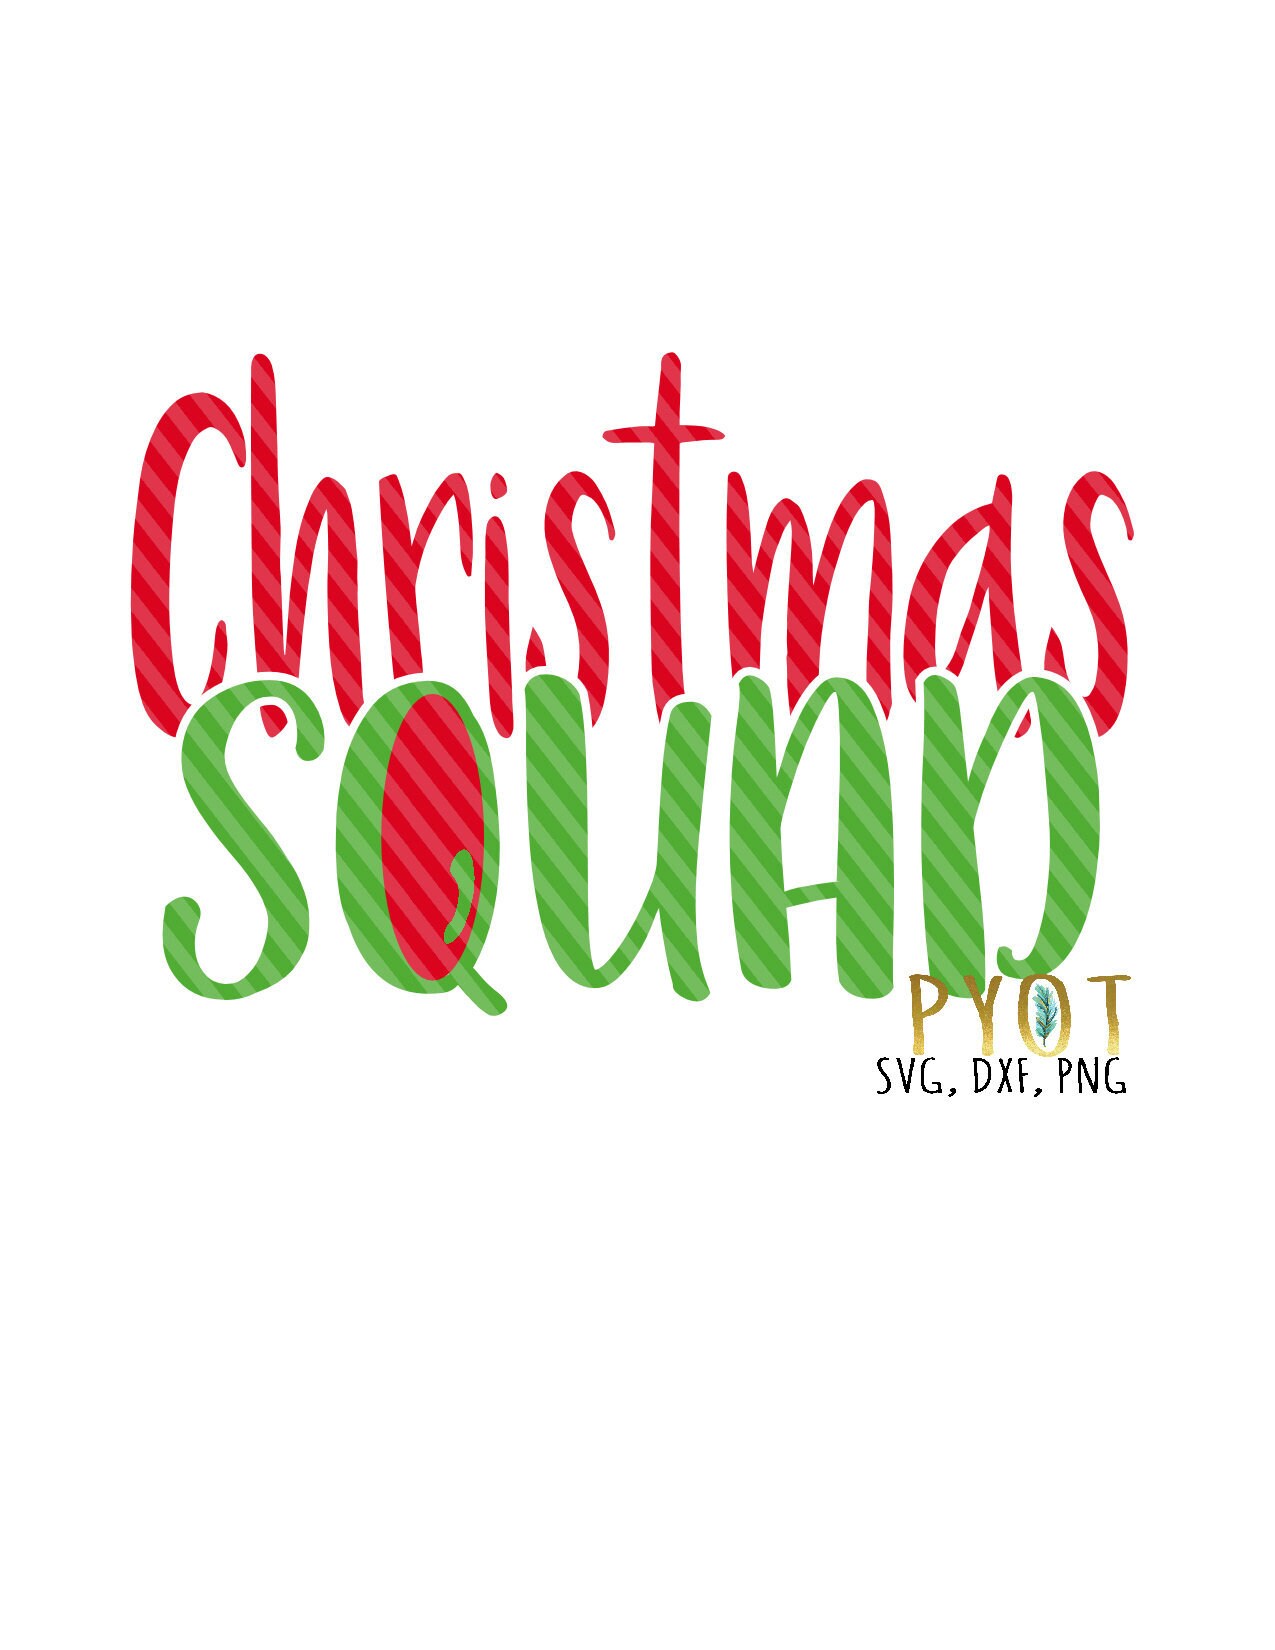 Christmas Squad SVG DXF PNG | Etsy